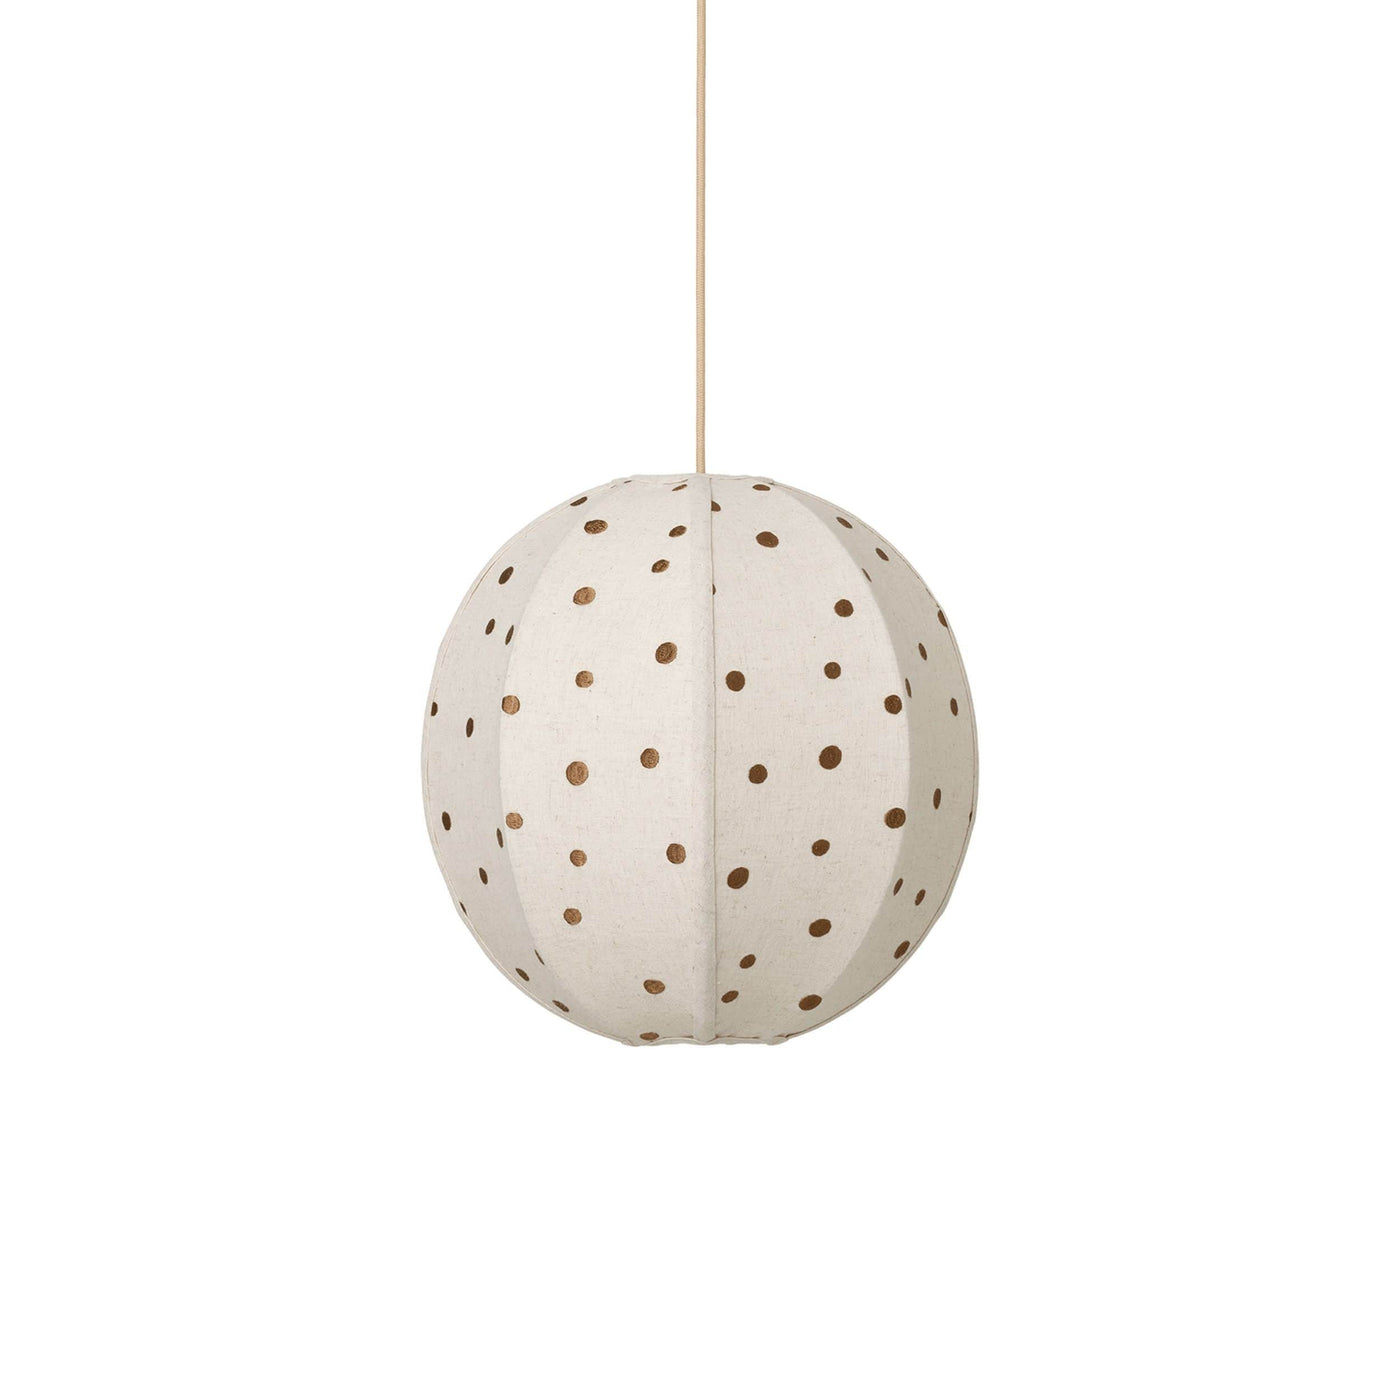 Ferm Living Dots Embroidered Textile Lampshade. Shop online at someday designs.